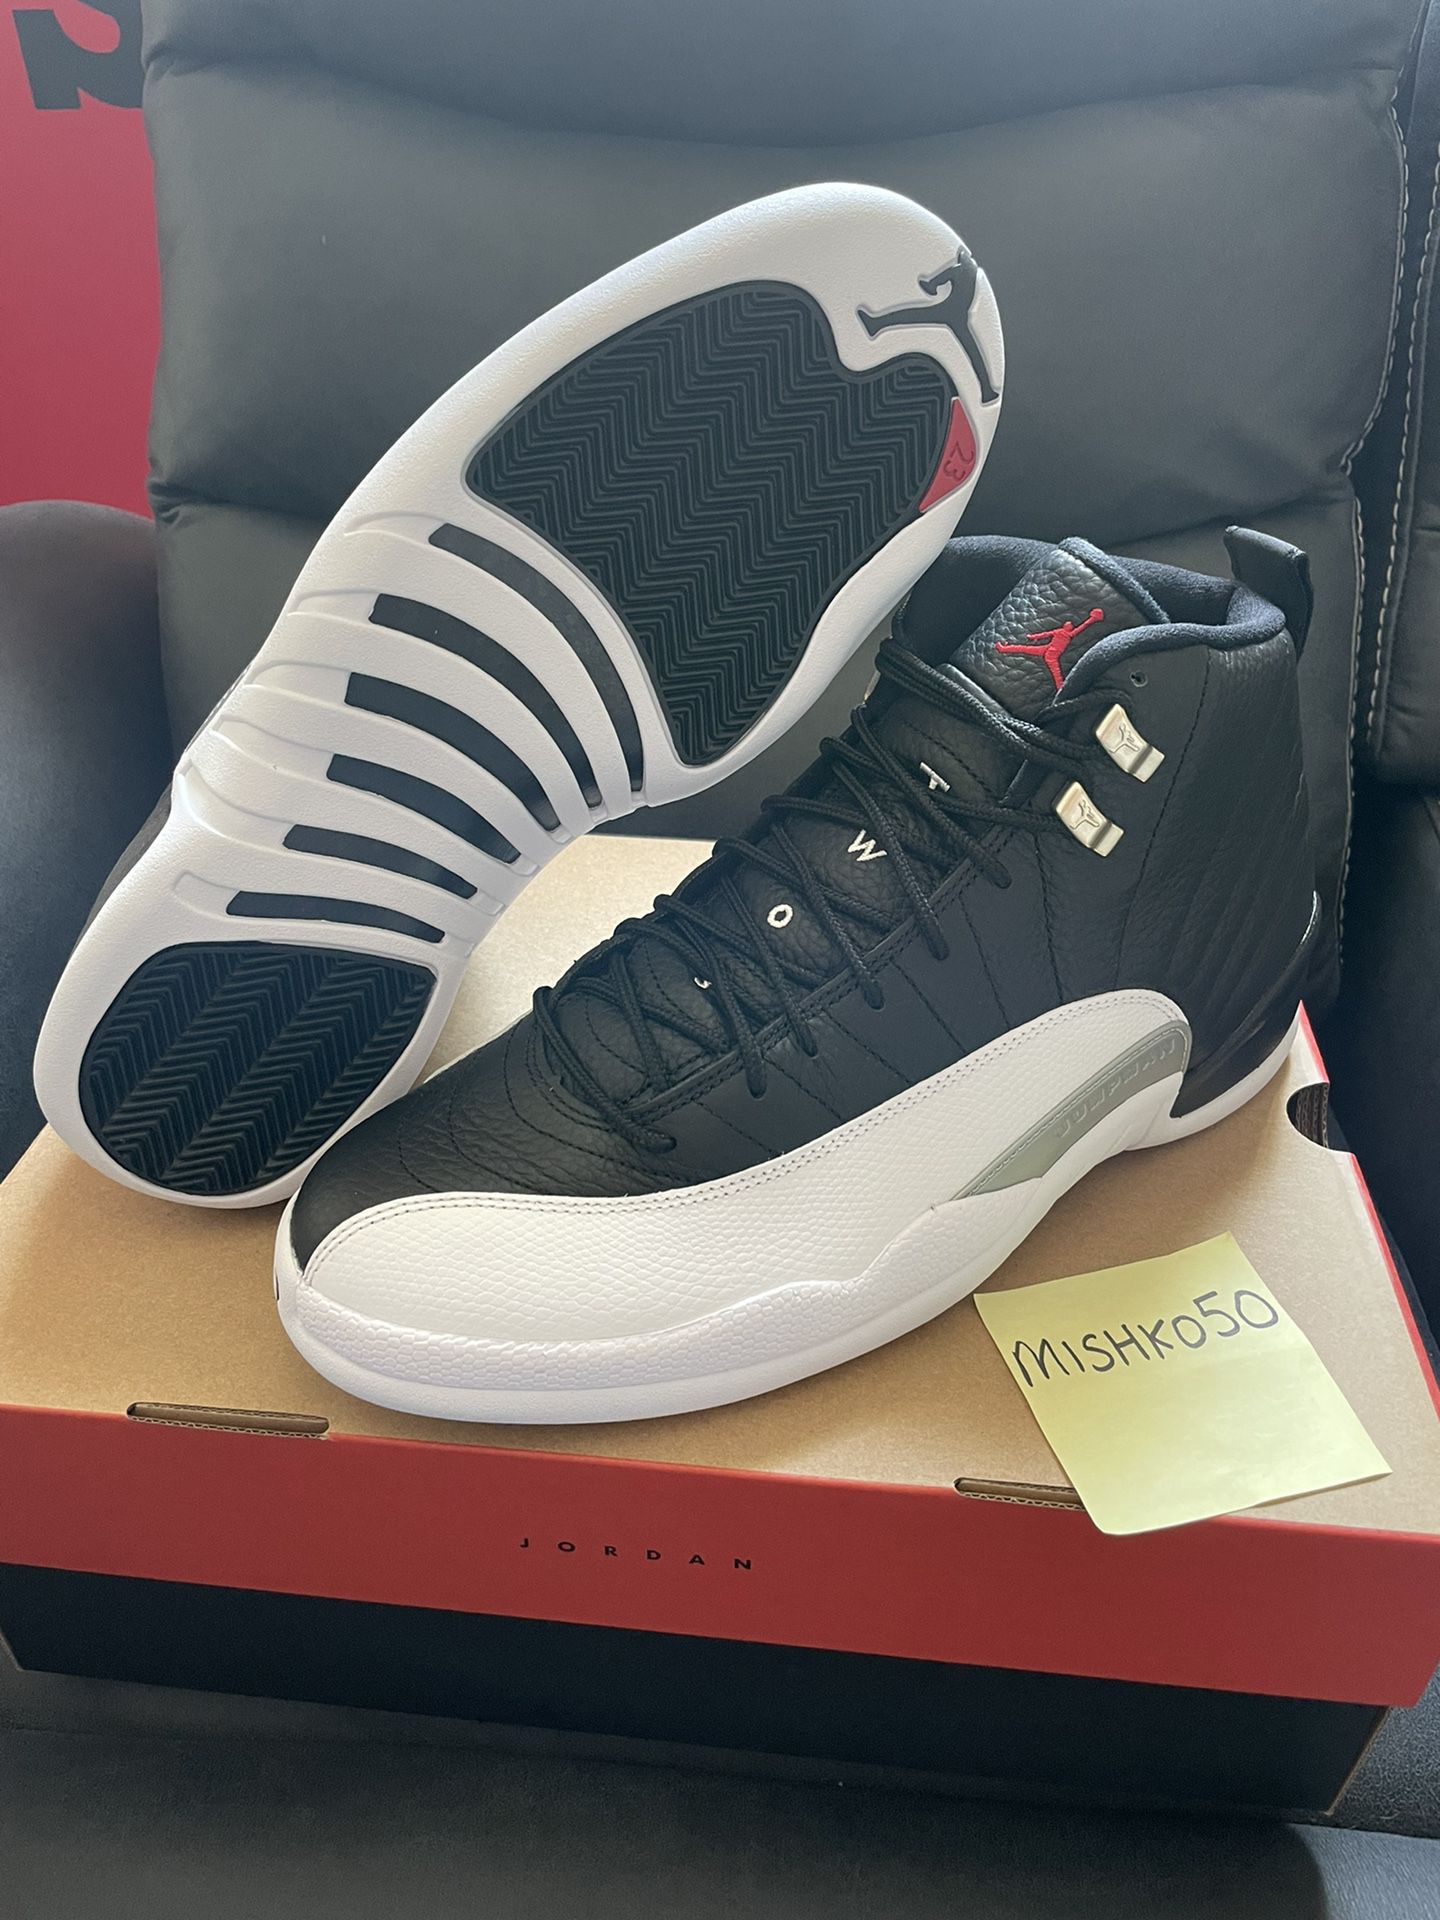 Air Jordan Retro 12 Playoffs Men’s Size 13 Reverse Taxi Black White Nike  High OG 1 Dunk Low Bred UNC 6 Off-White Supreme Panda for Sale in Vernon